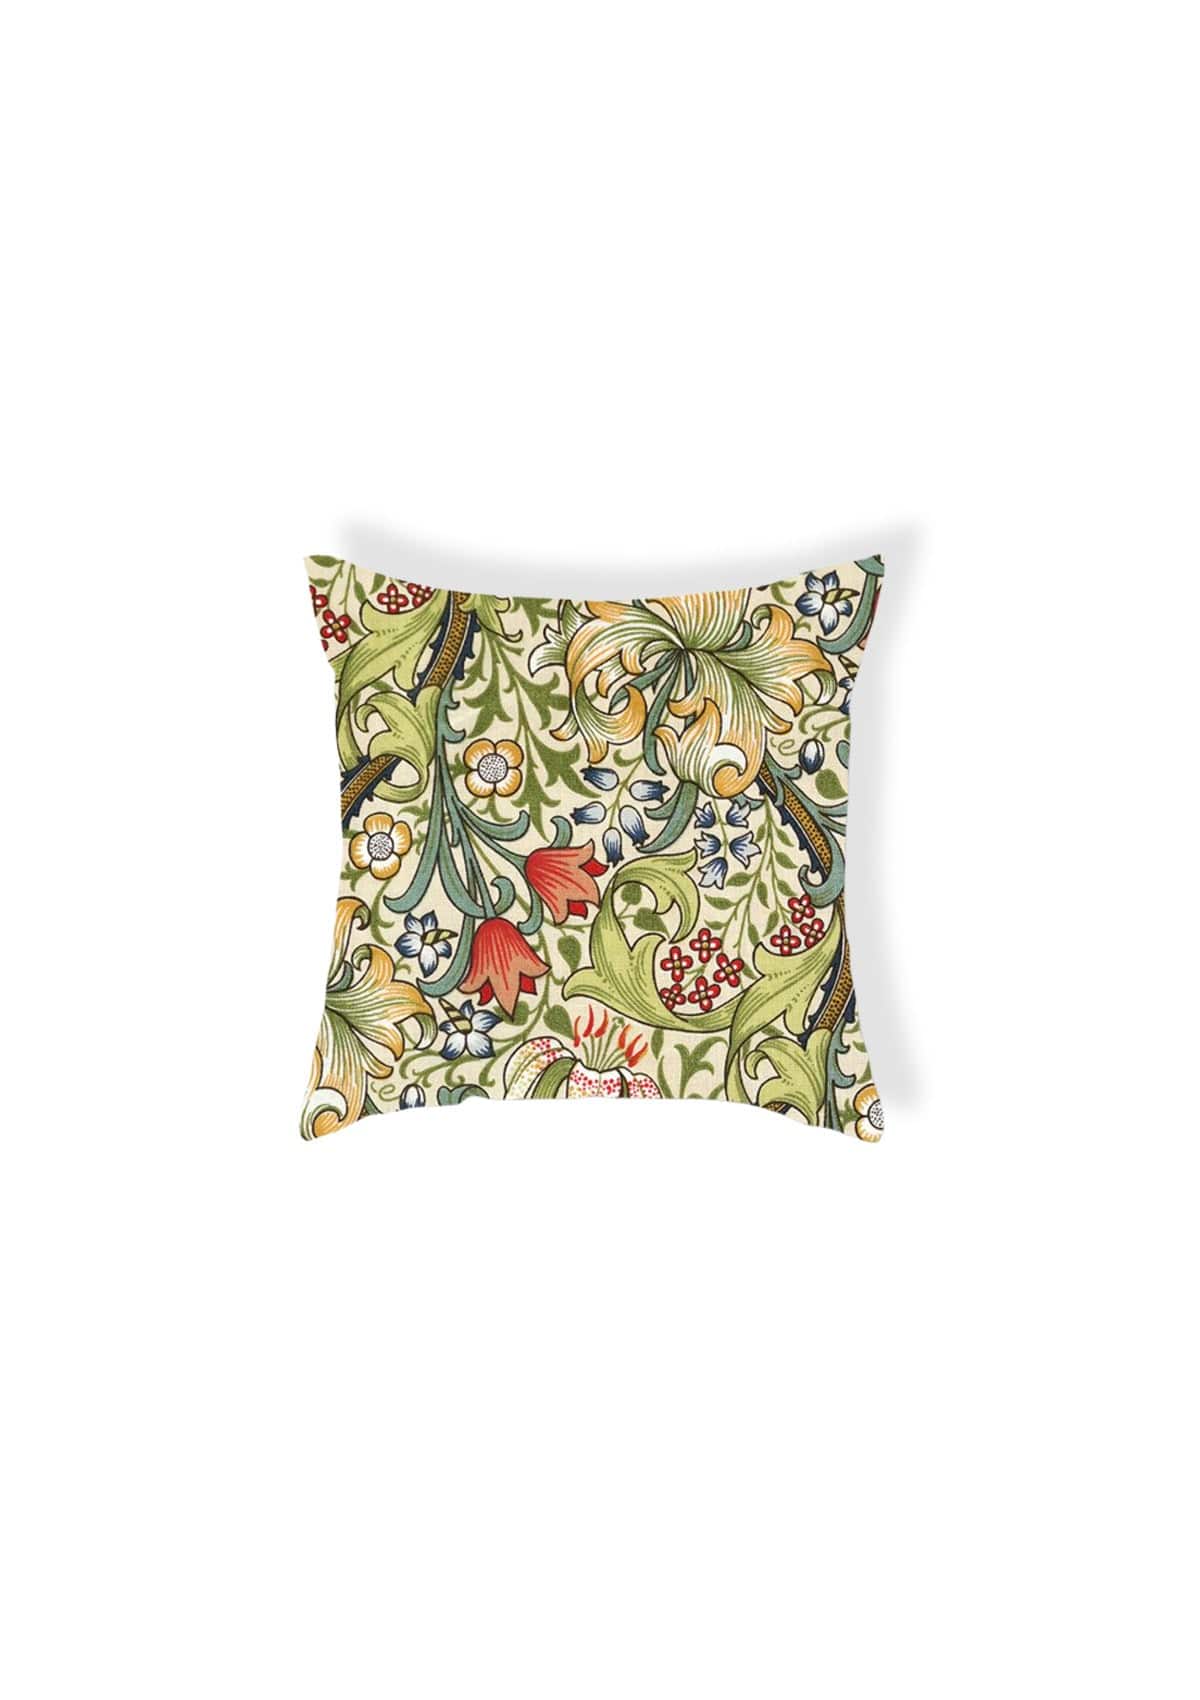 Vintage Floral Cushion Covers